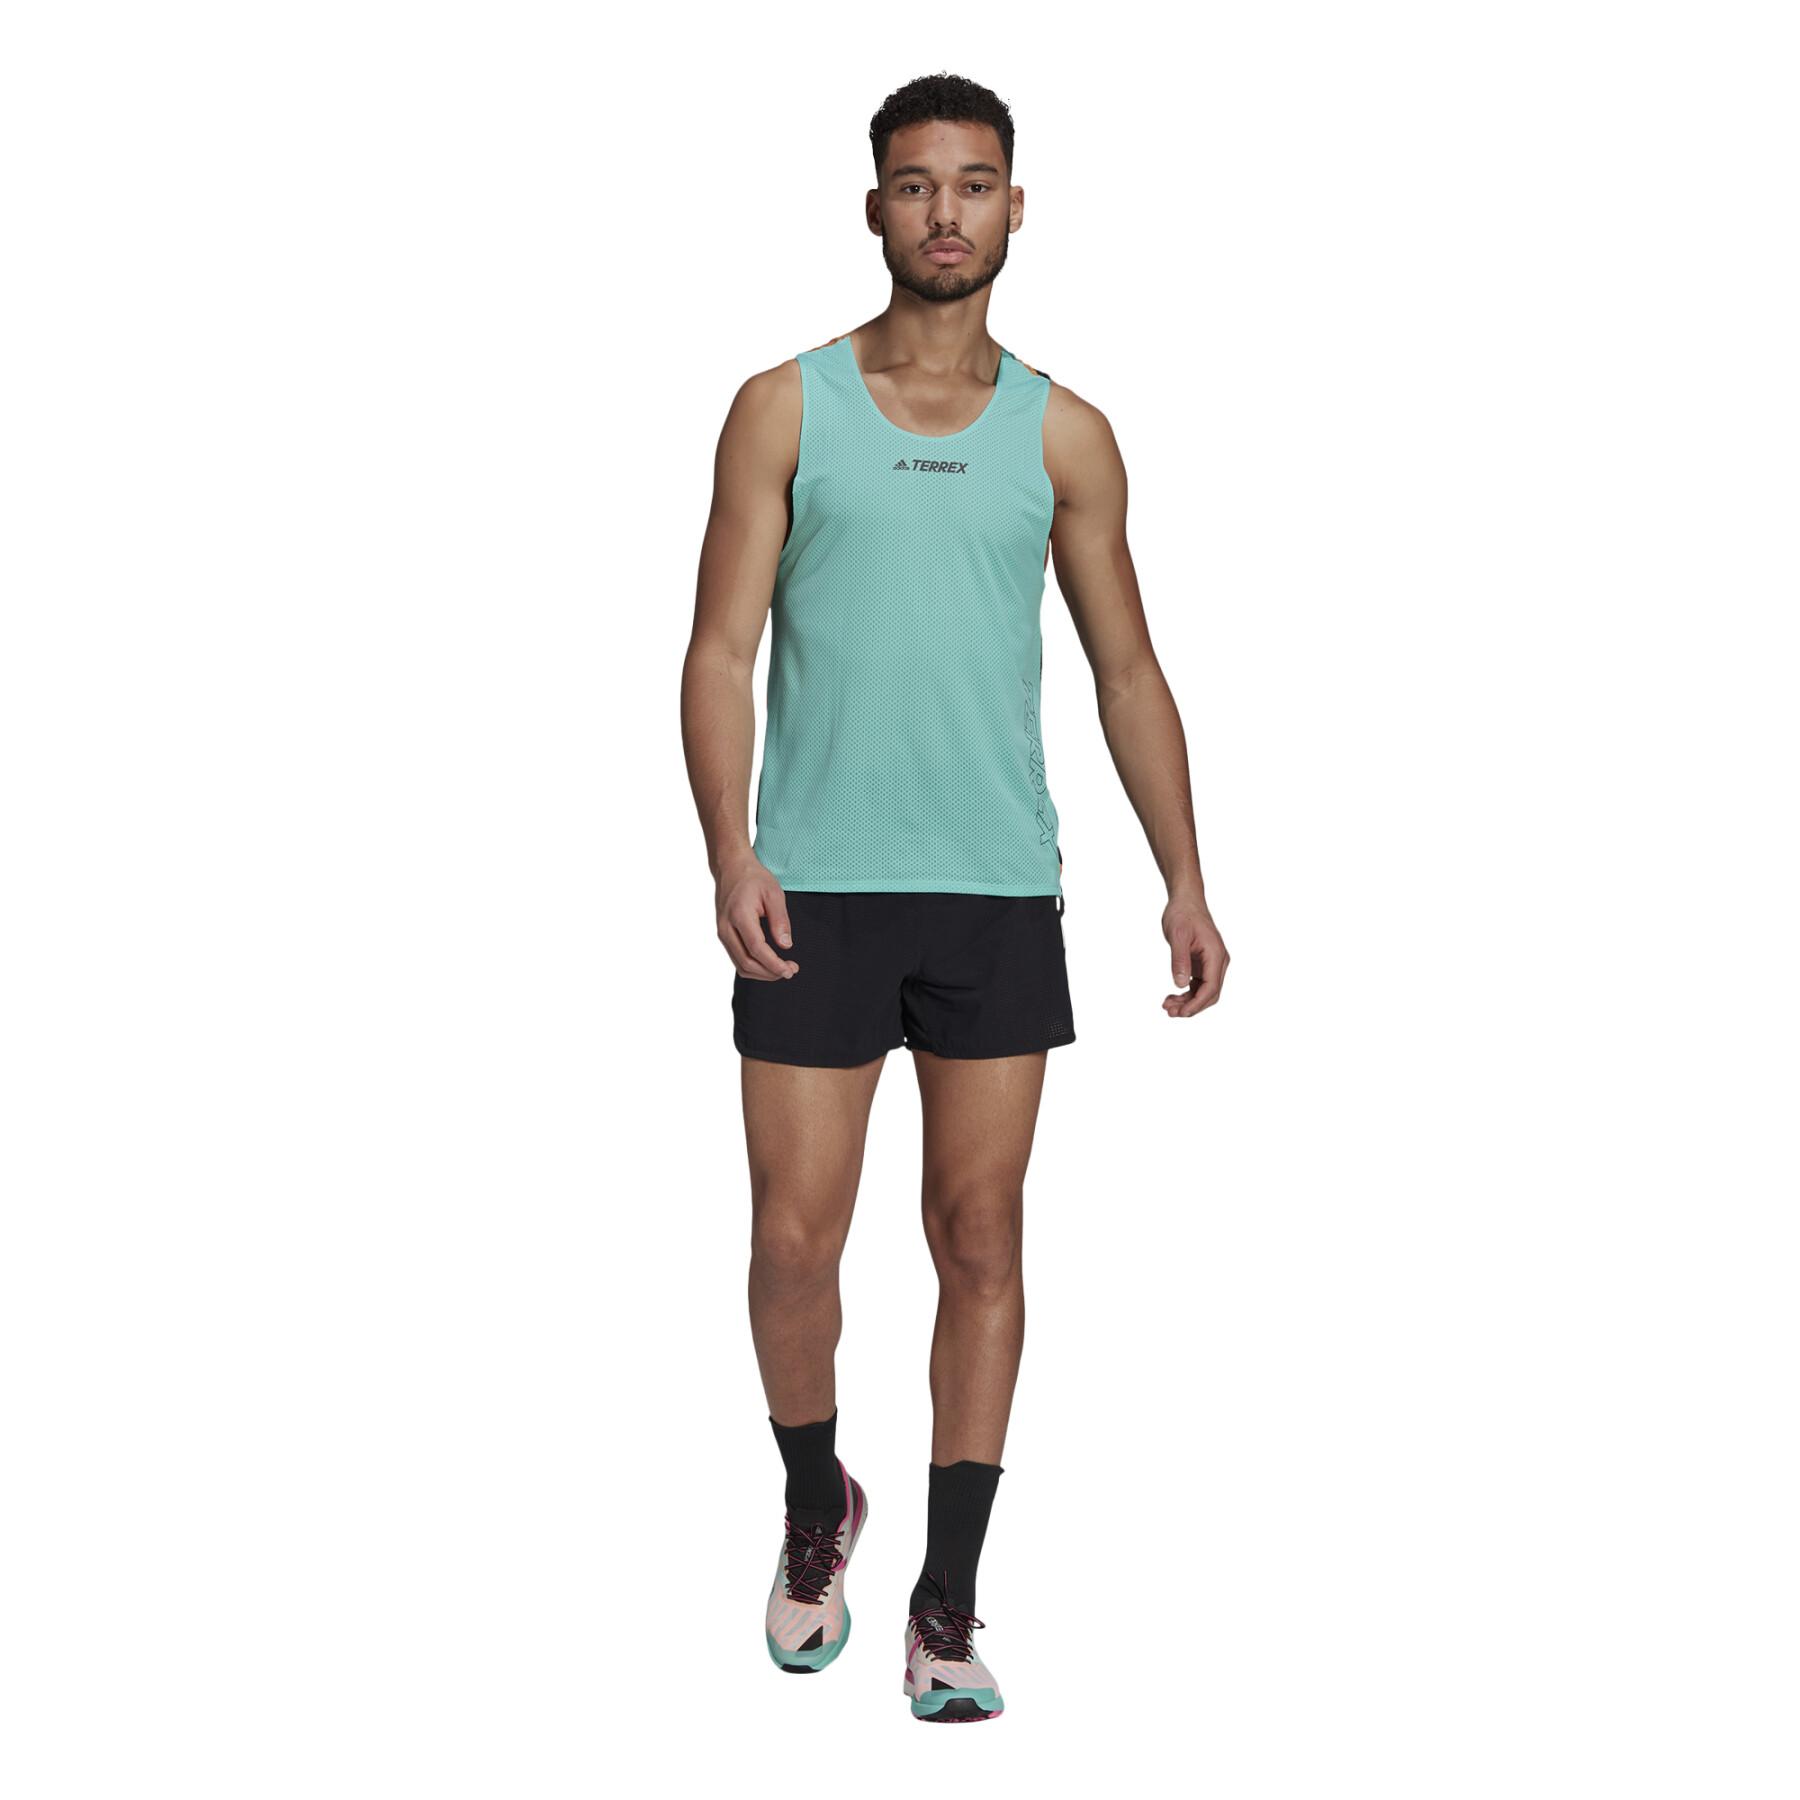 Tampo do tanque adidas Terrex Parley Agravic Trail Running